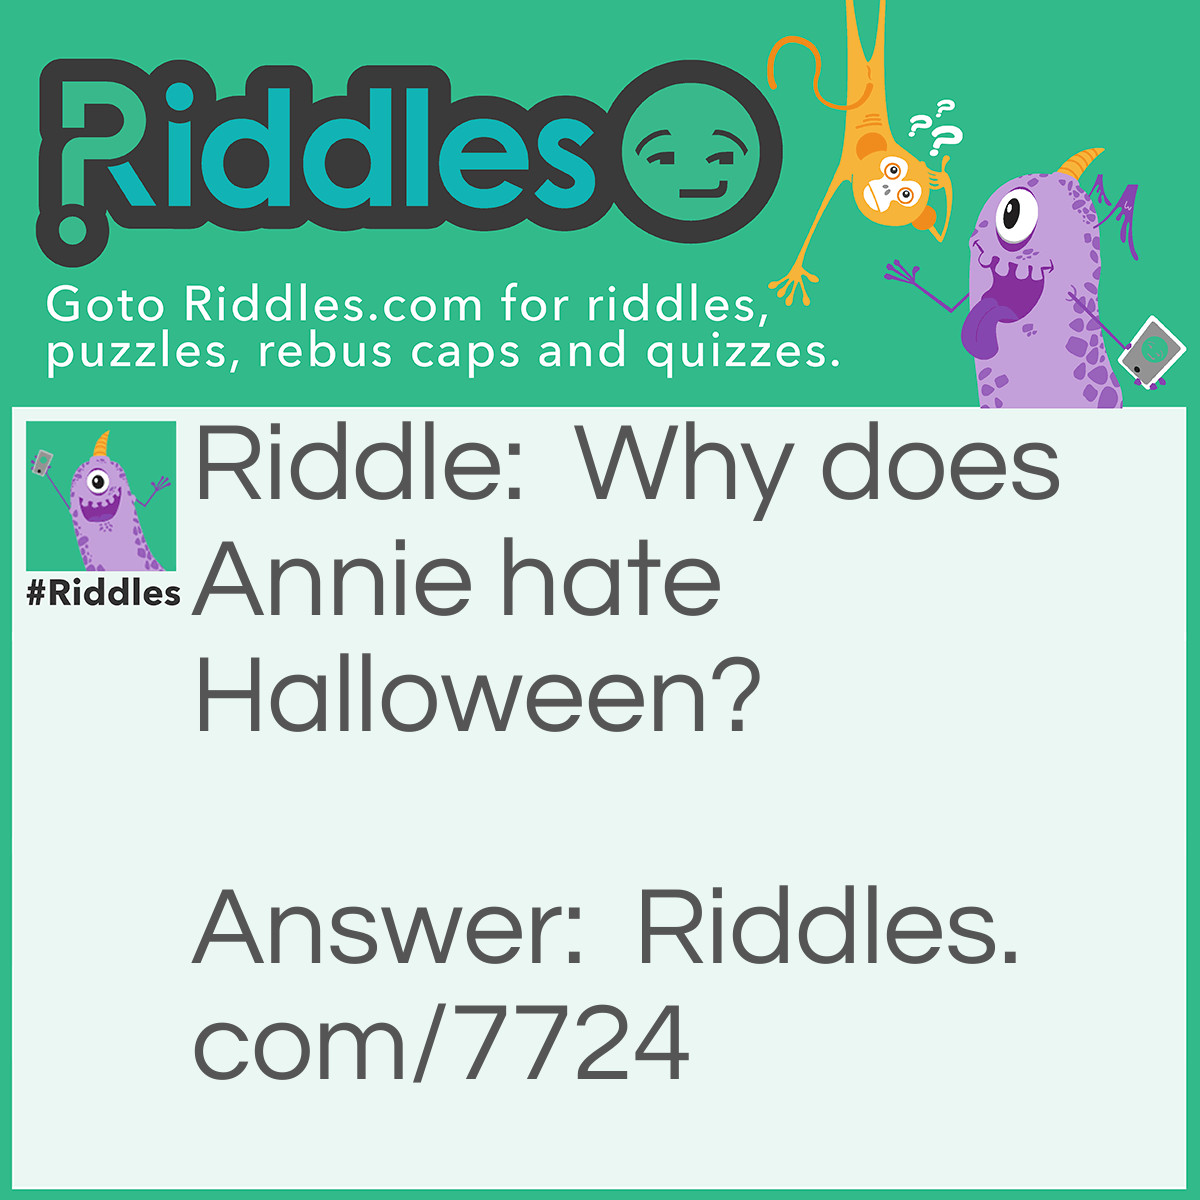 Riddle: Why does Annie hate Halloween? Answer: Instead of Treats, she get tricks. "It's a hard-knock life for us."